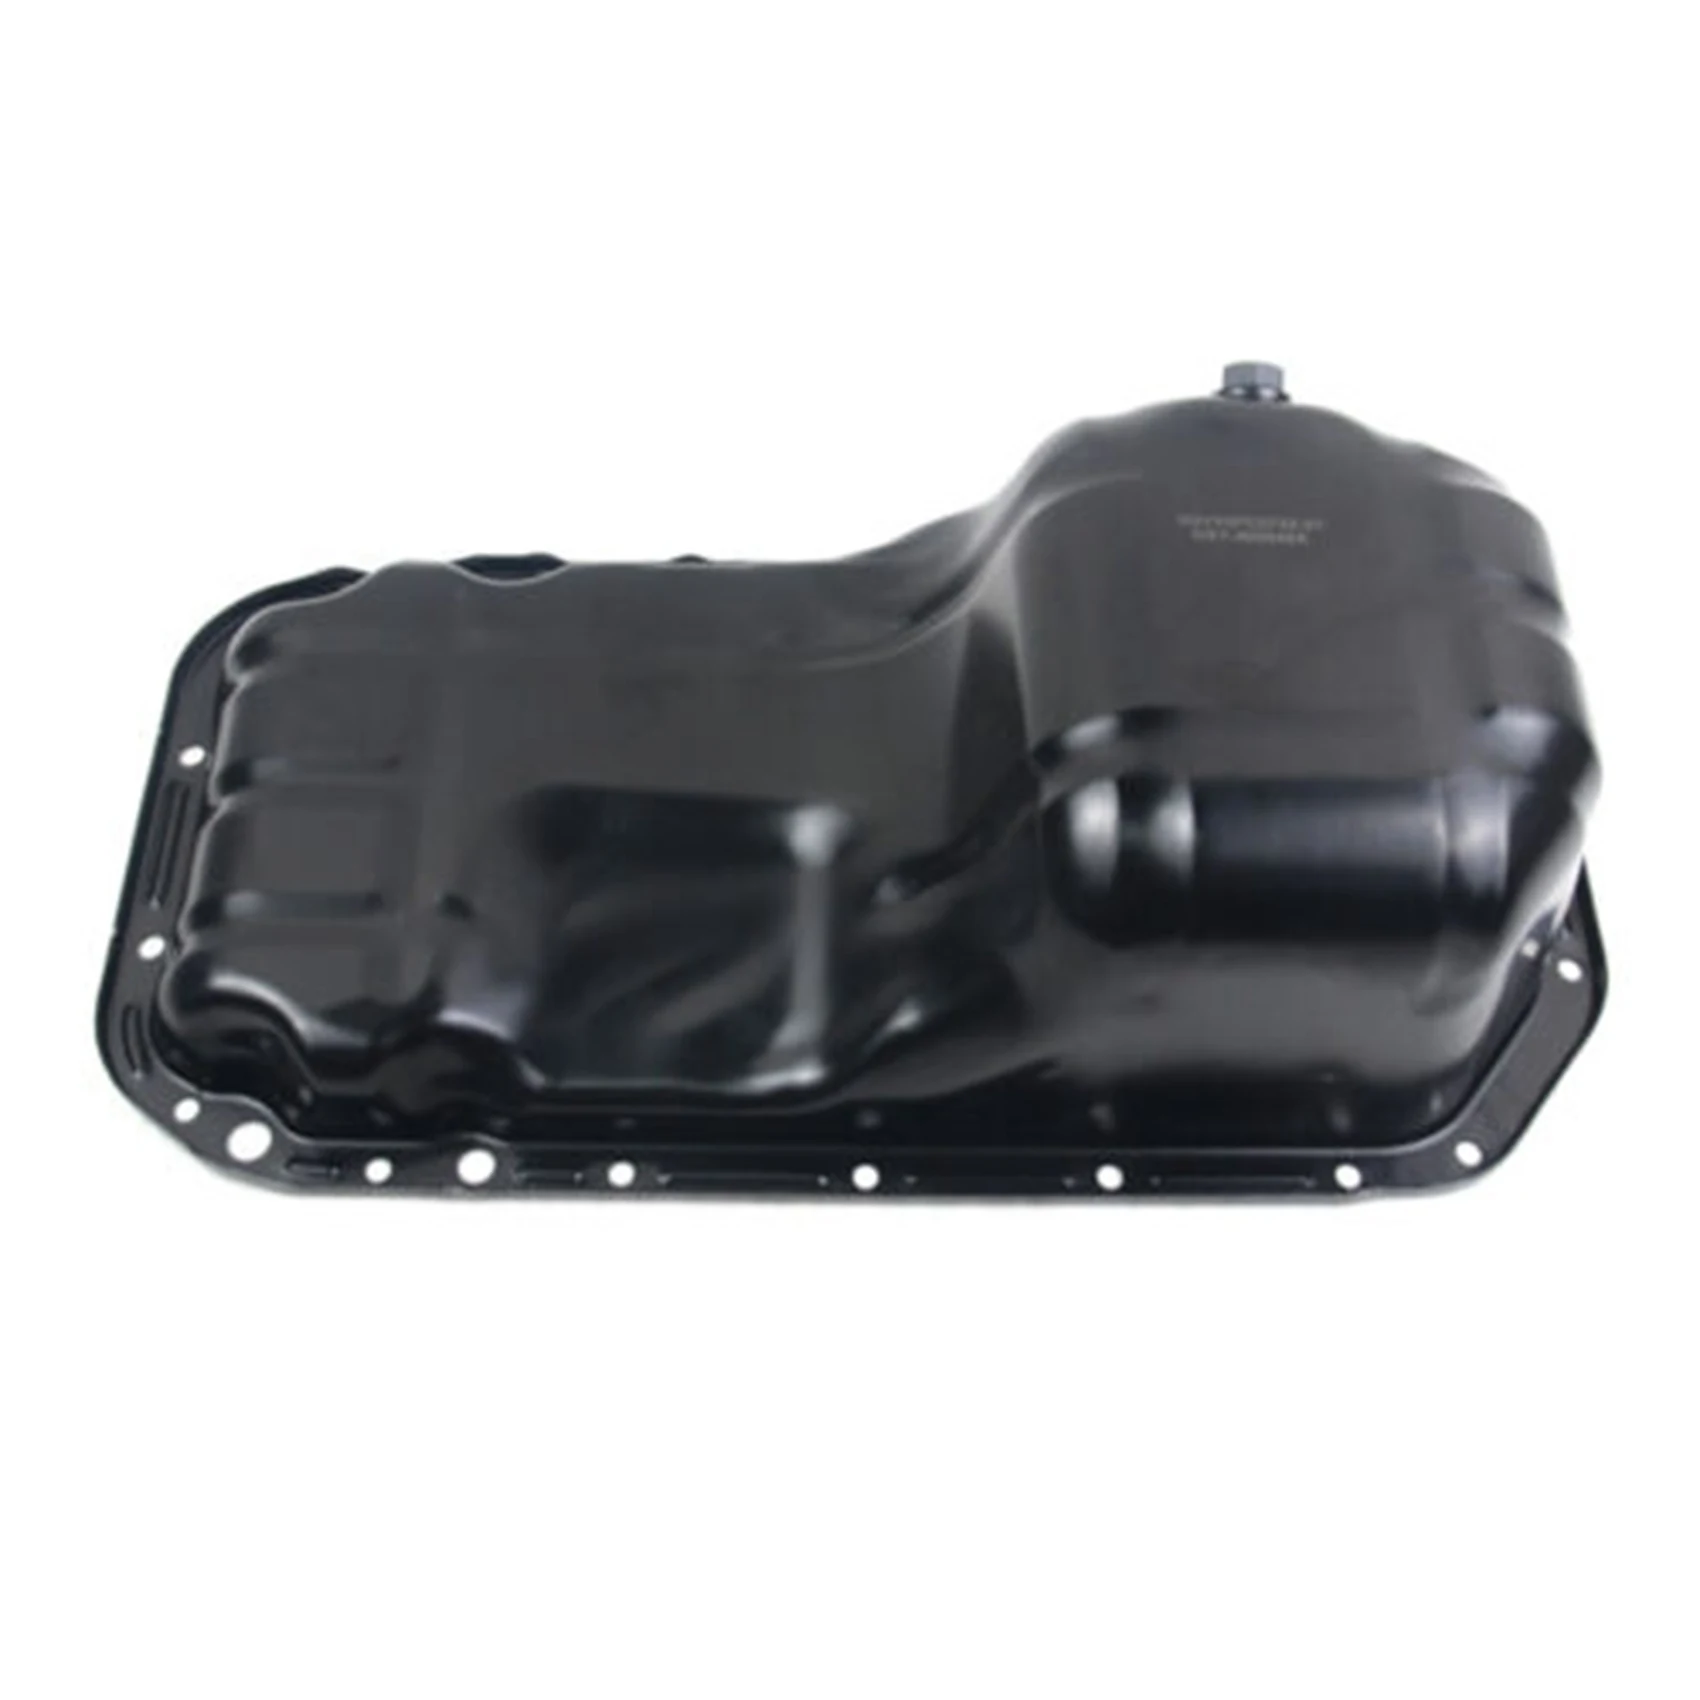 

MD371776 Oil Pan for Mitsubishi Space Star DG3A MPV Lancer Saloon Estate CS3A CSW 1.6 16V 4G18 1998-2008 Oil Sump